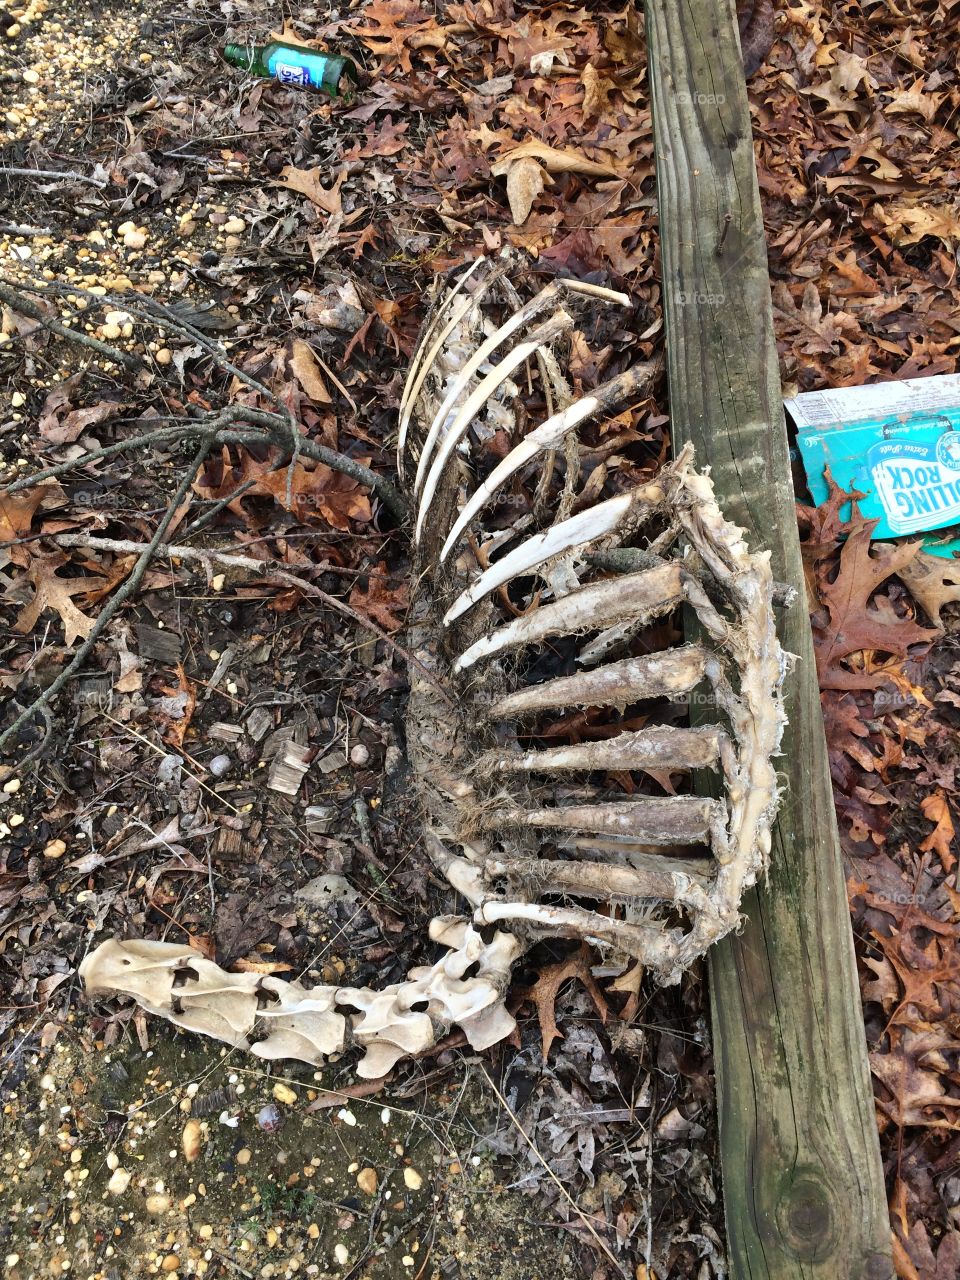 Skeletal remains seen out on the rzr 